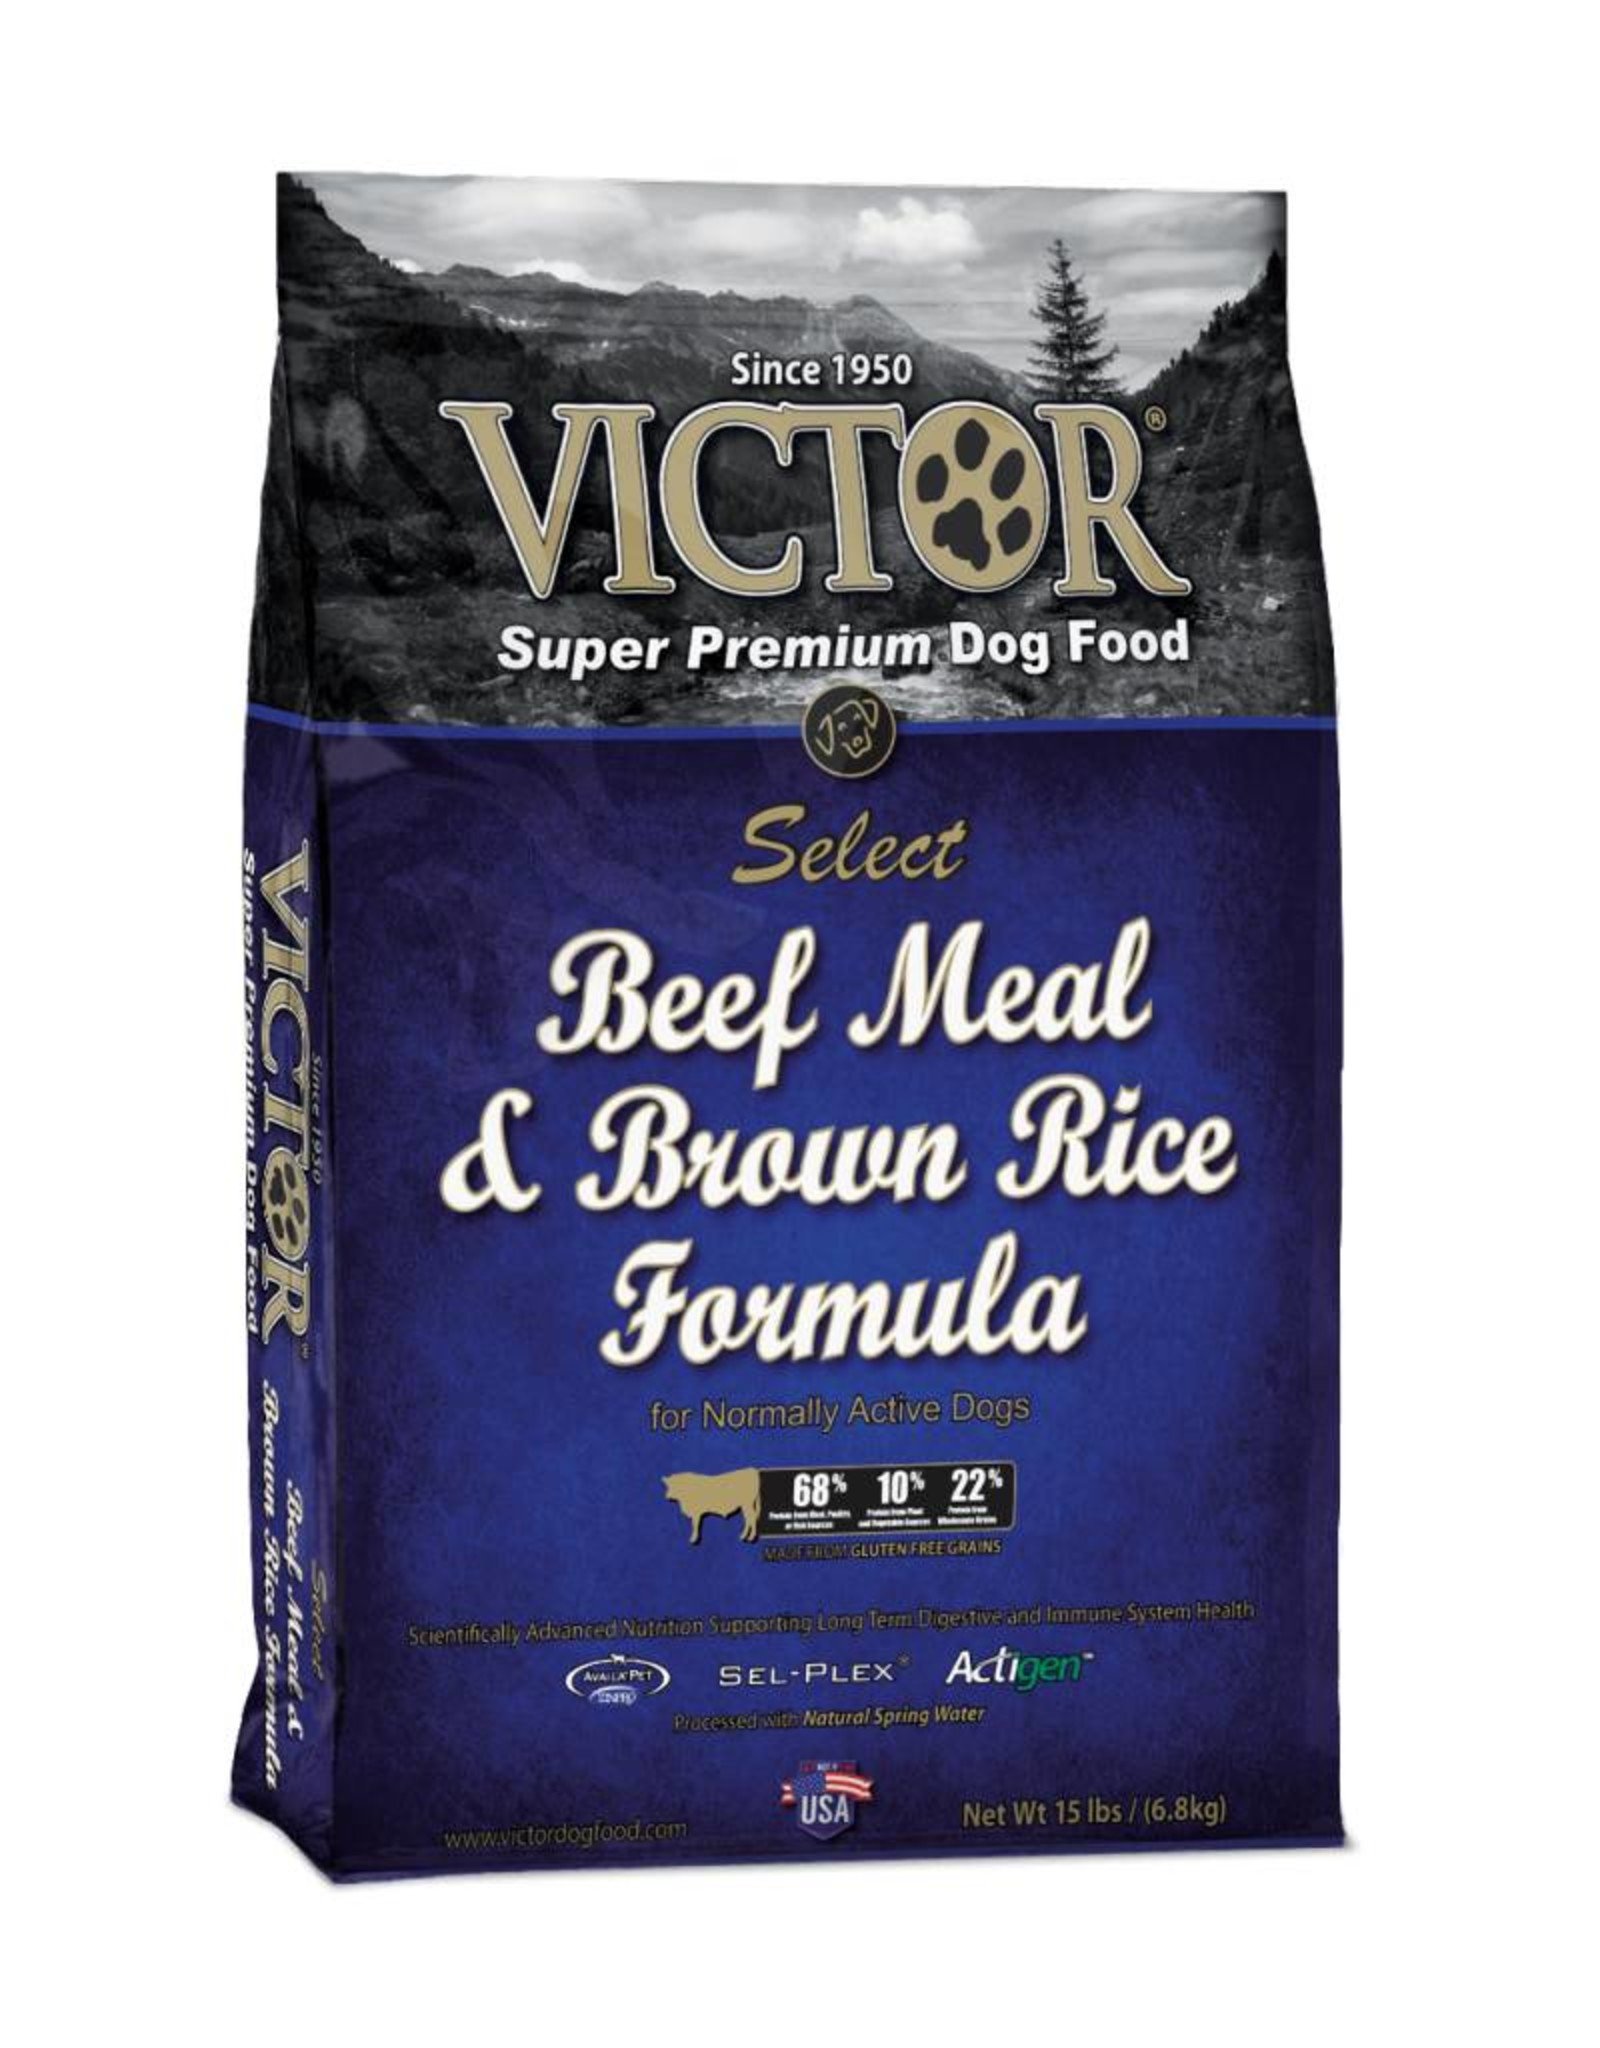 is victor dog food good for dogs